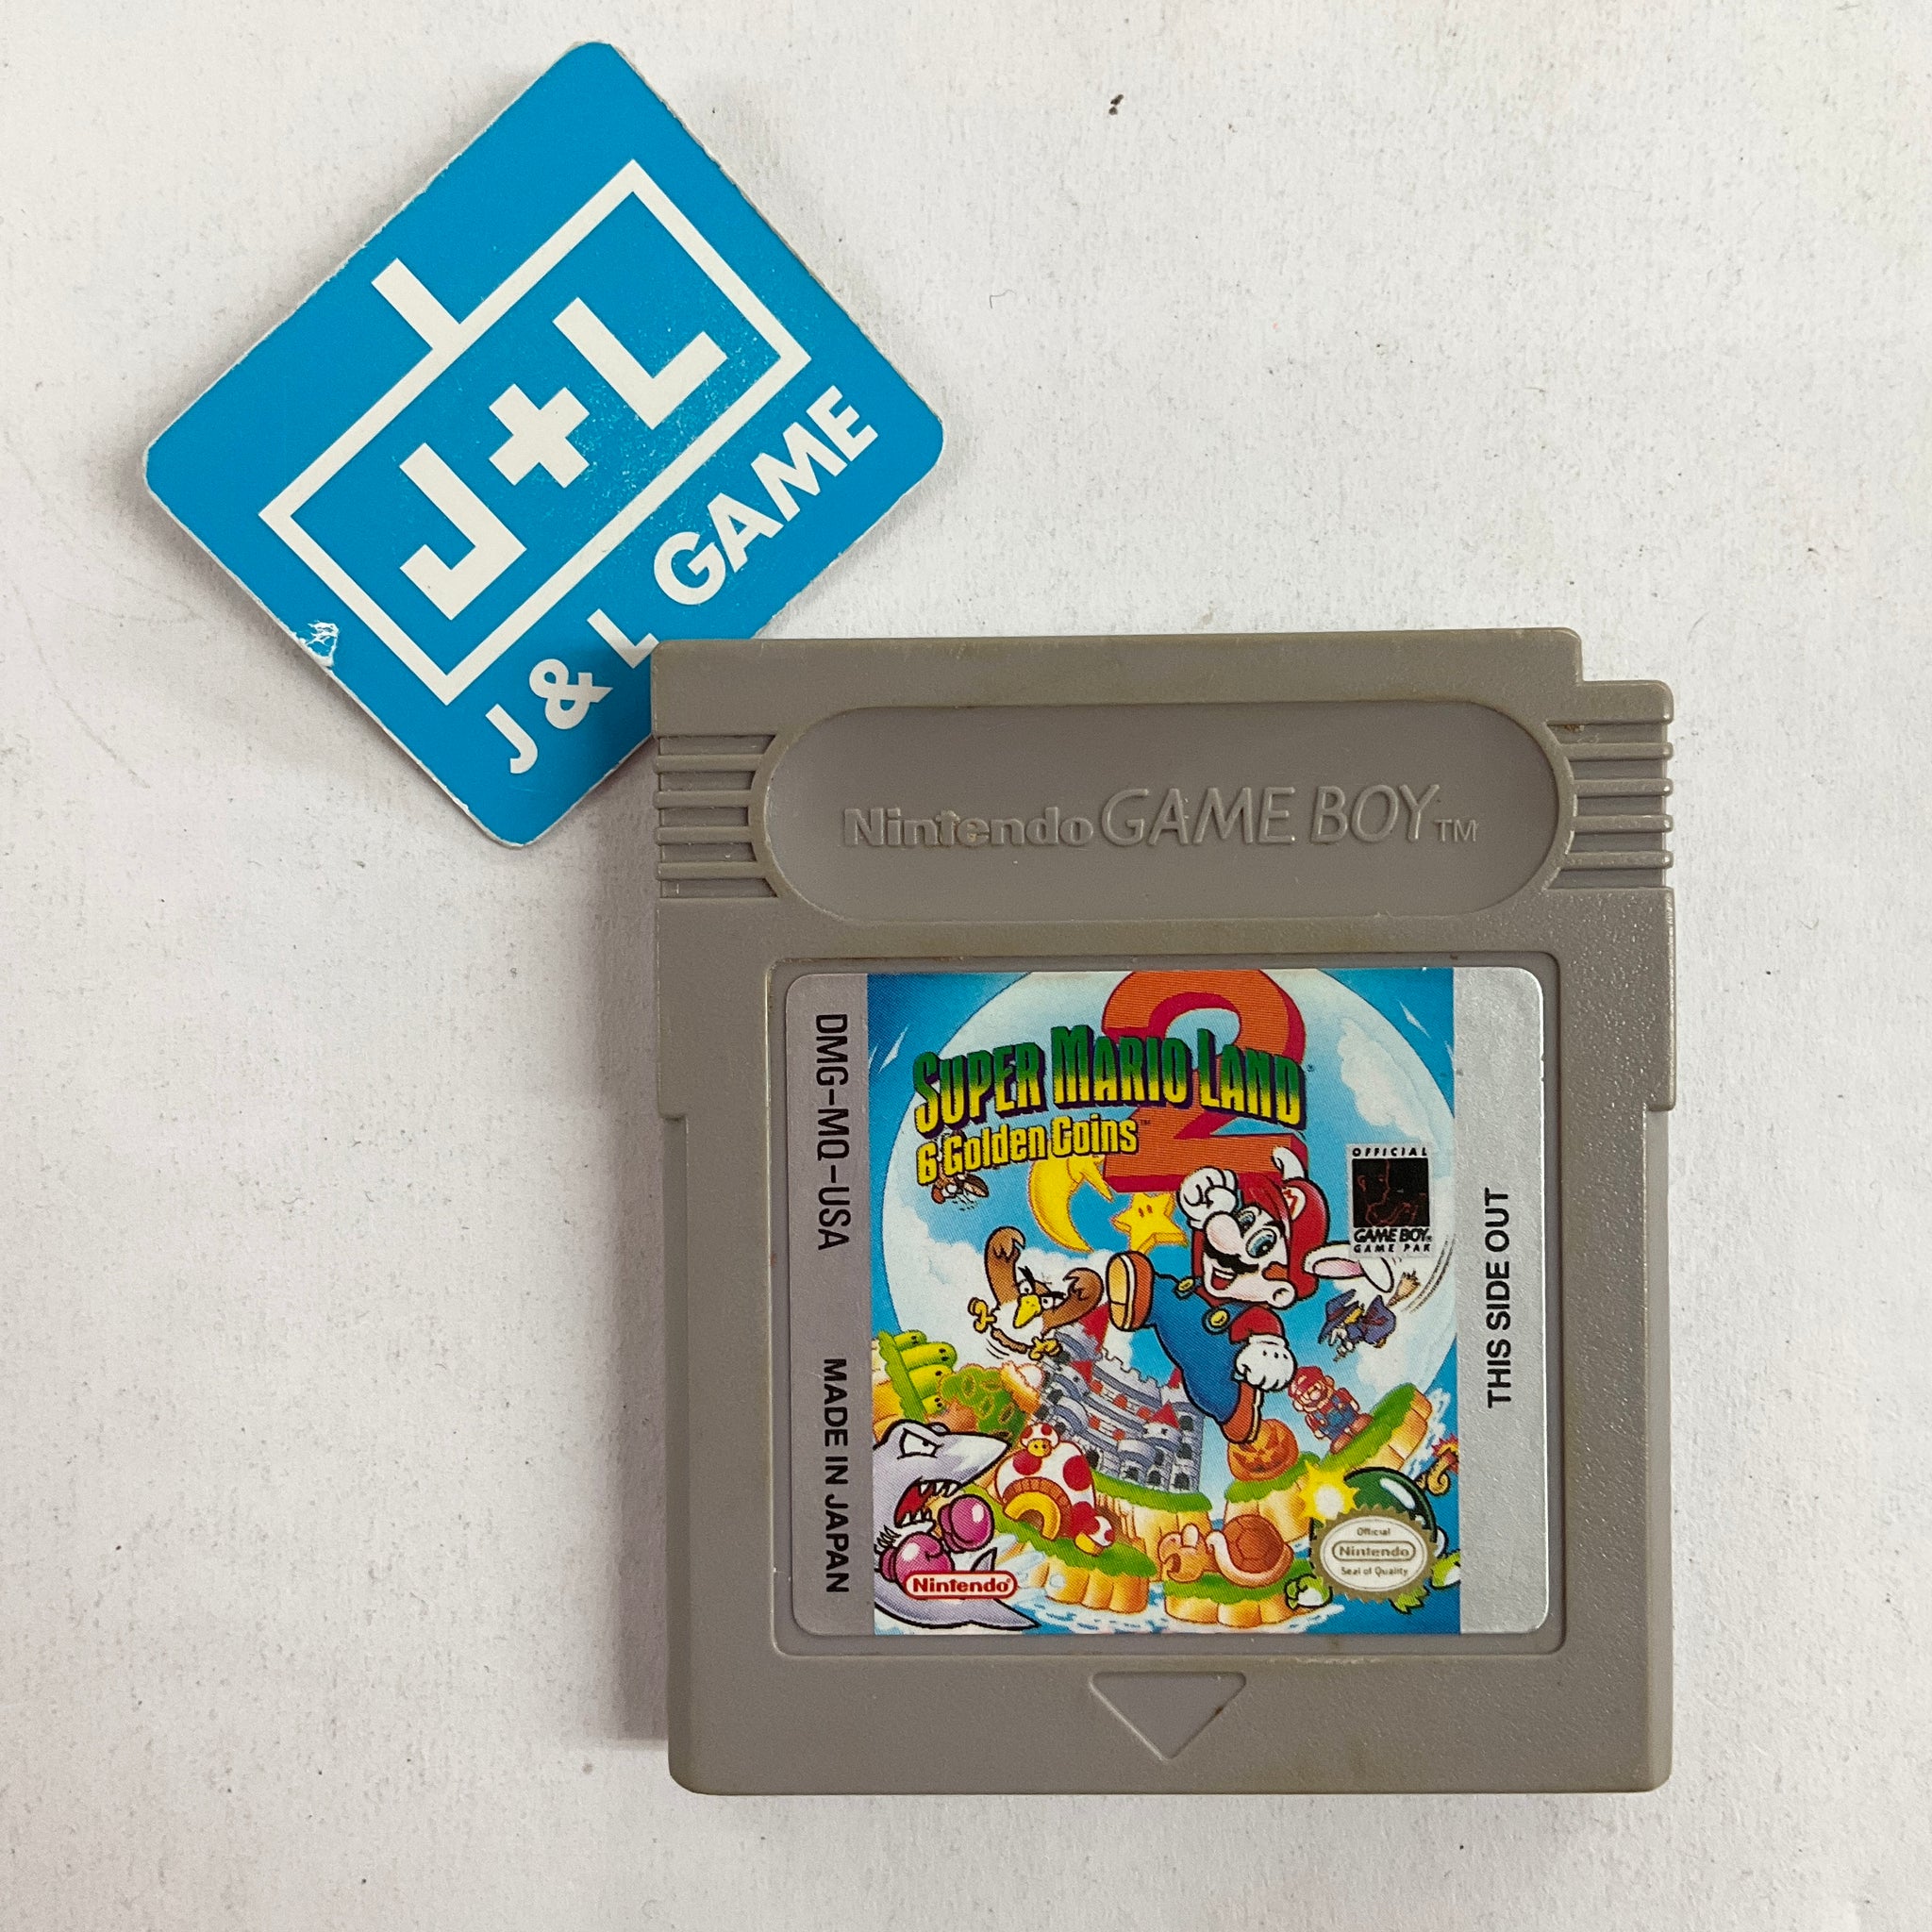 Mario Land 6 Golden Coins - (GB) Game Boy [Pre-Owned] – J&L Video Games New York City